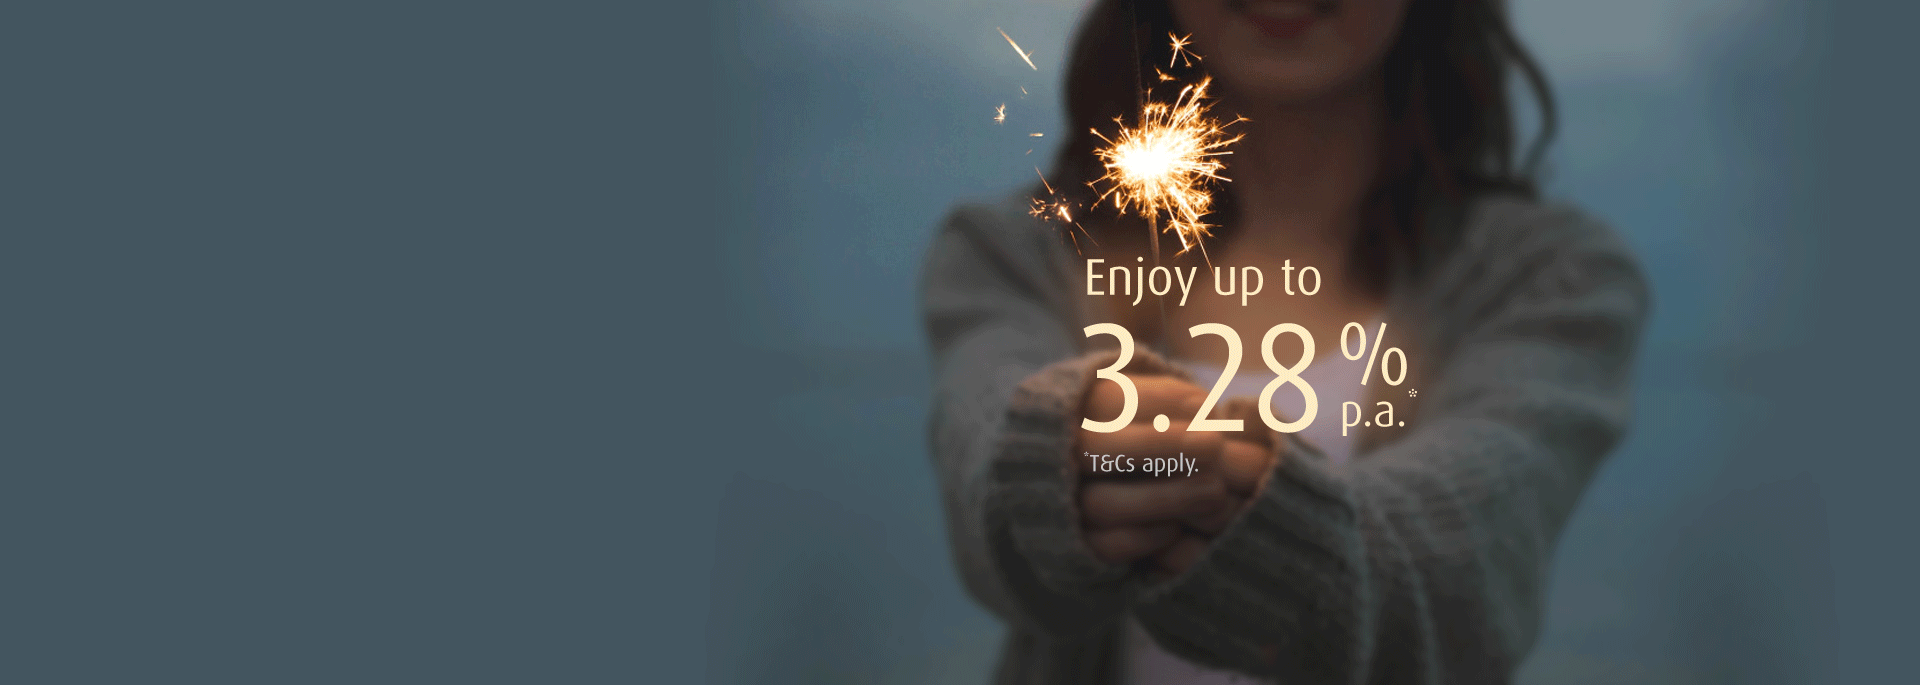 Text 'Enjoy up to 3.28% p.a.' over background of young woman holding a lit sparkler